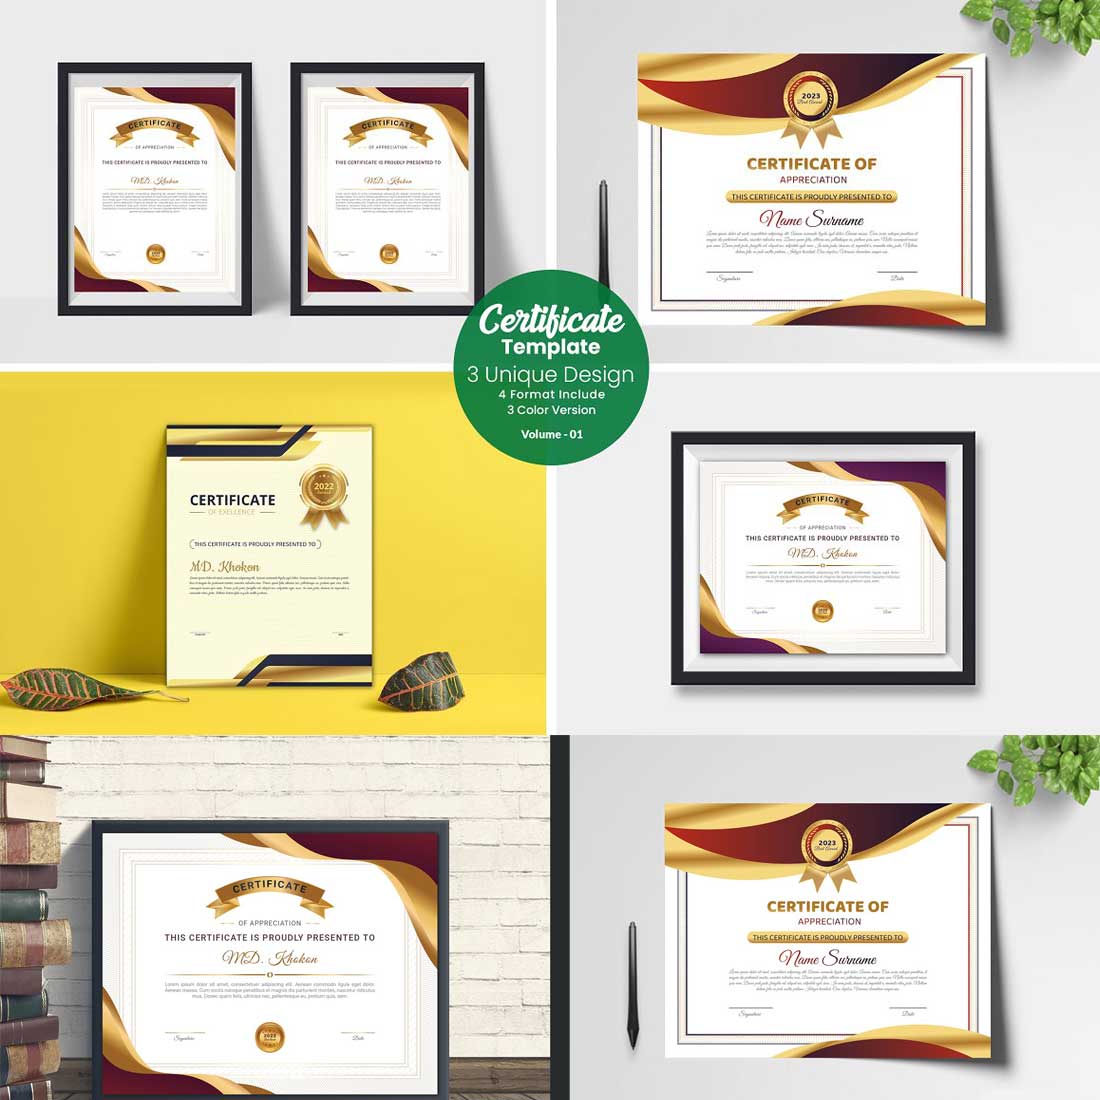 Modern Certificate Design Template cover image.